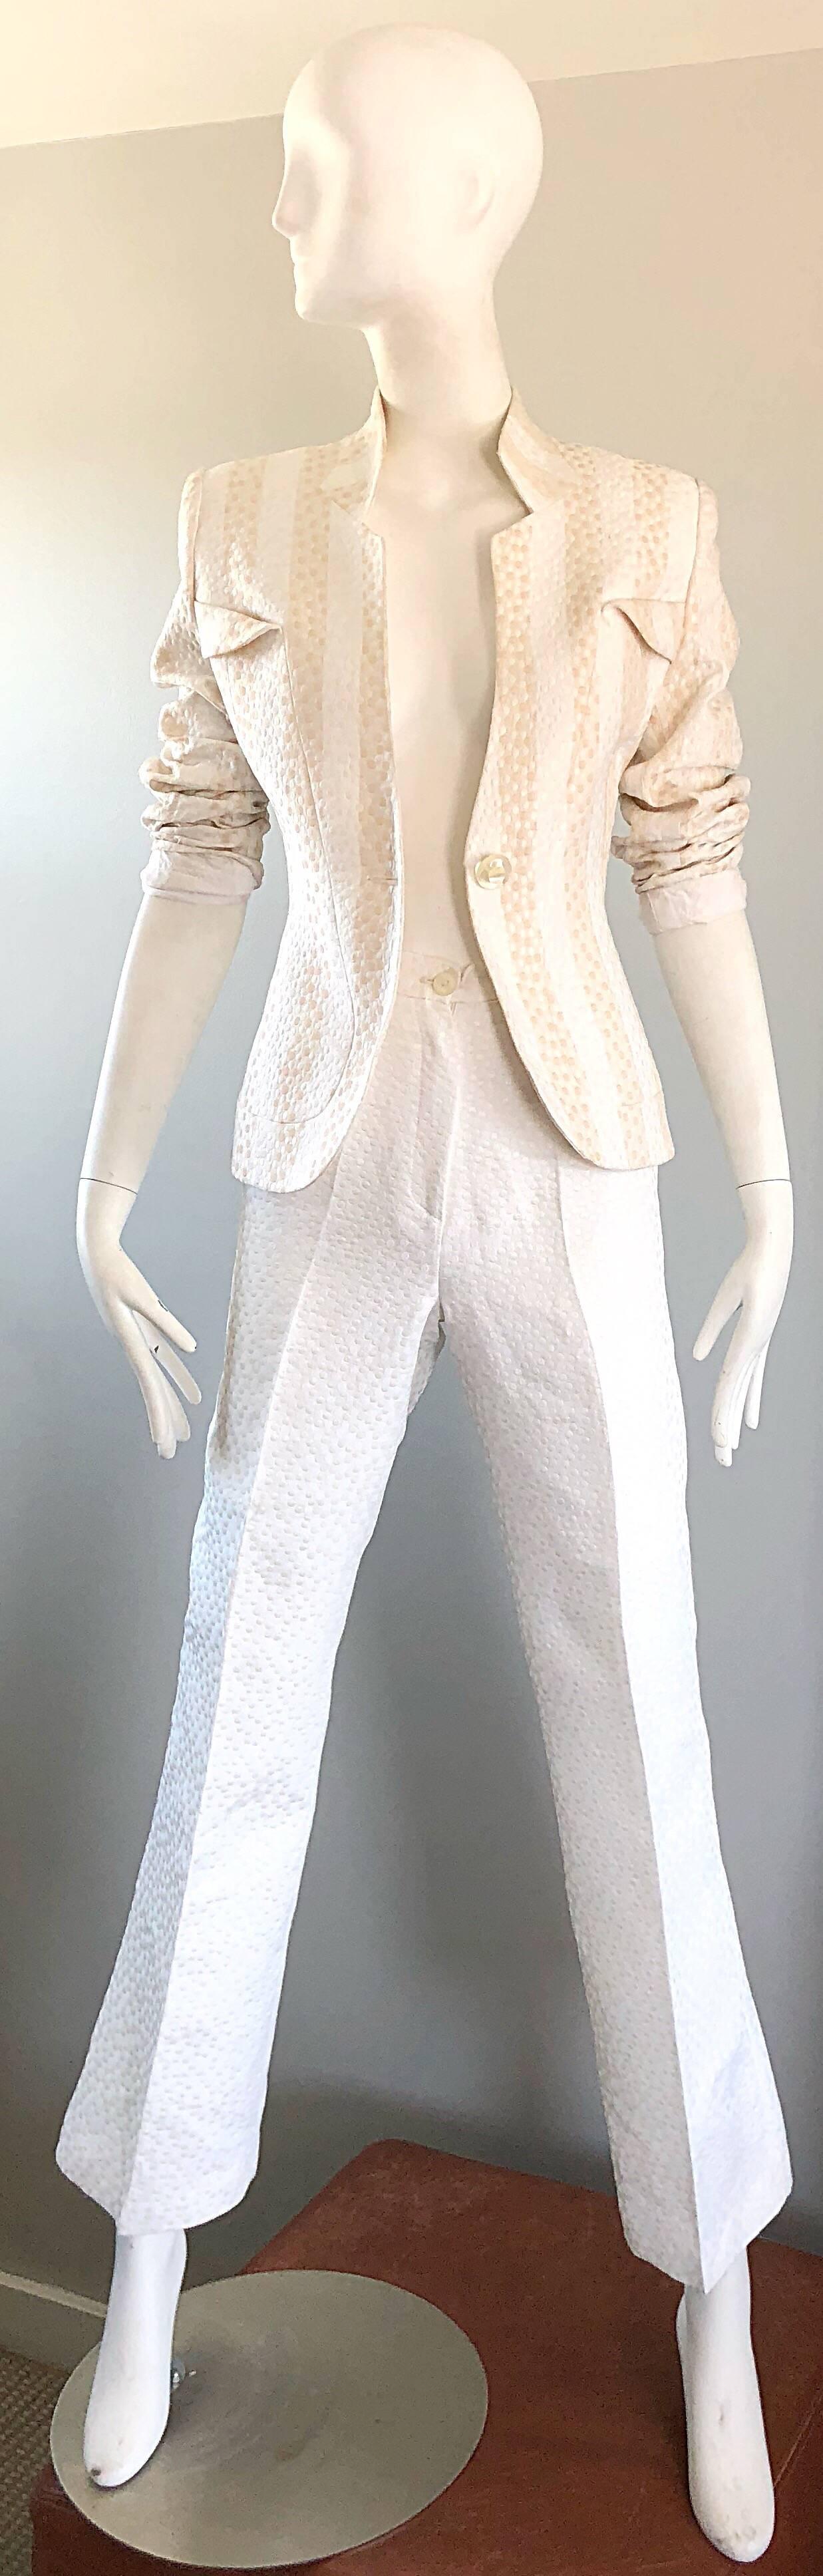 Vintage Max Nugus Couture 1990s White + Beige Polka Dot 90s Tailored Pant Suit 4